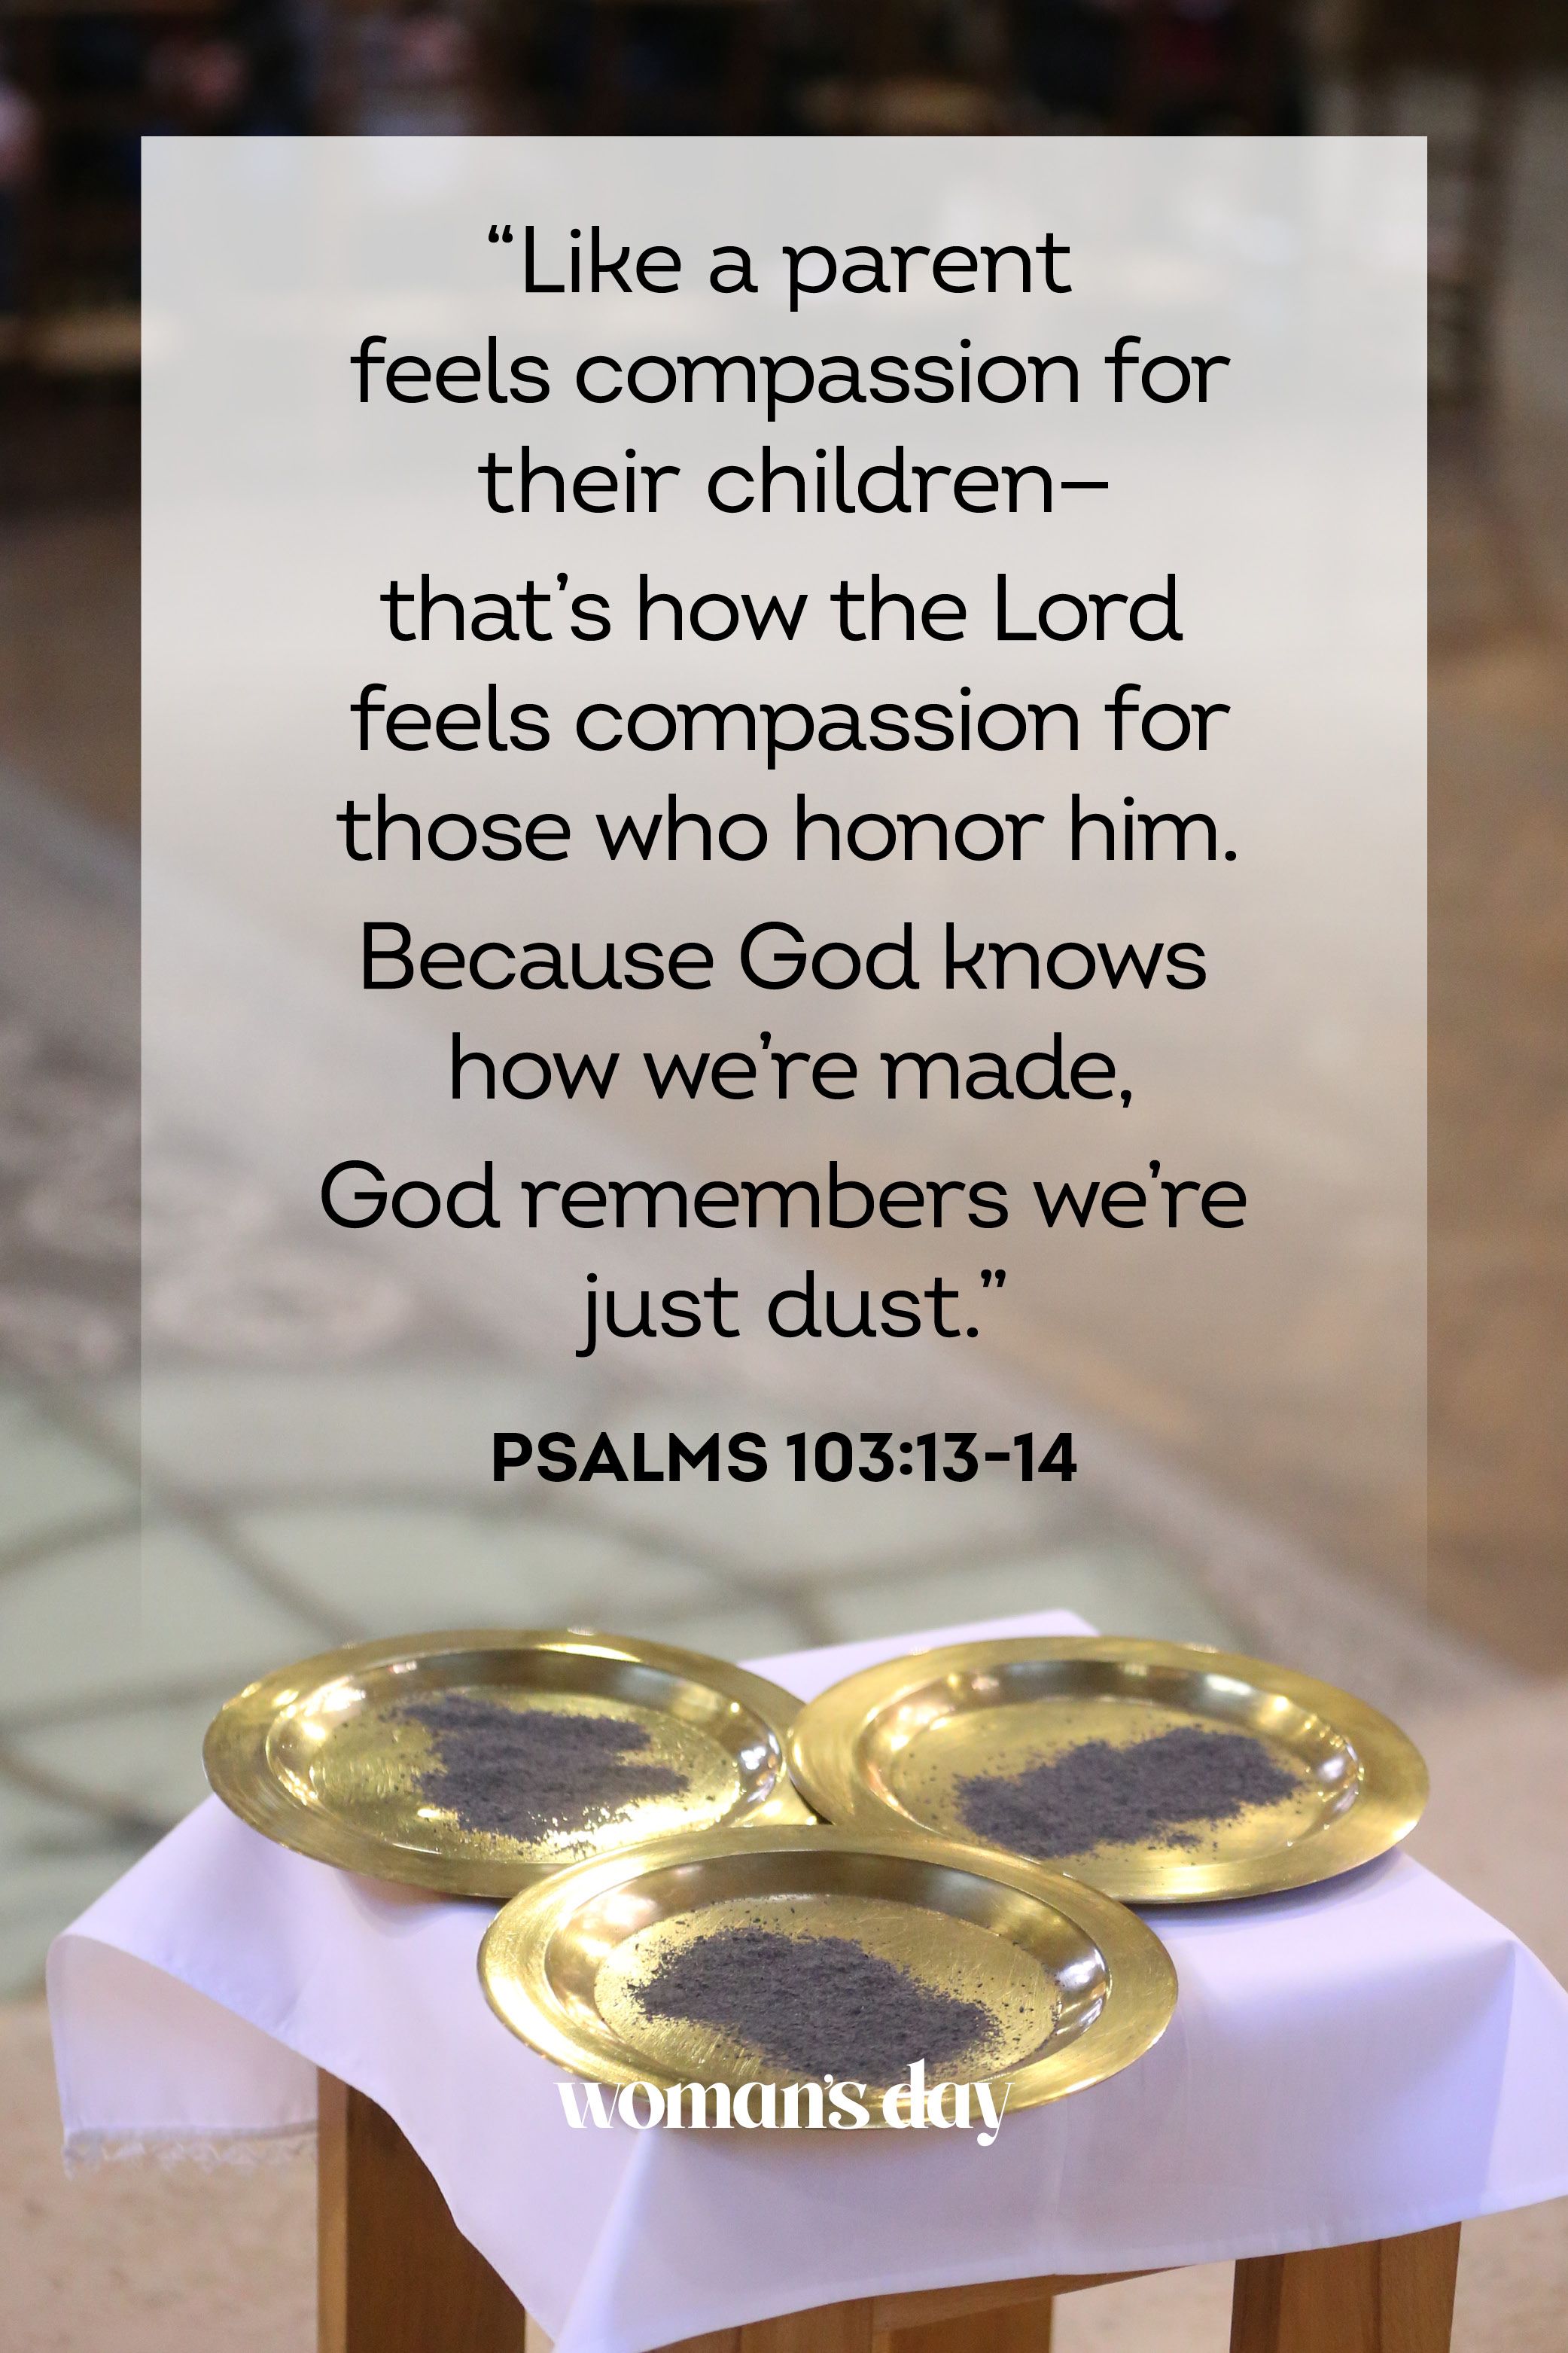 compassion quotes from the bible